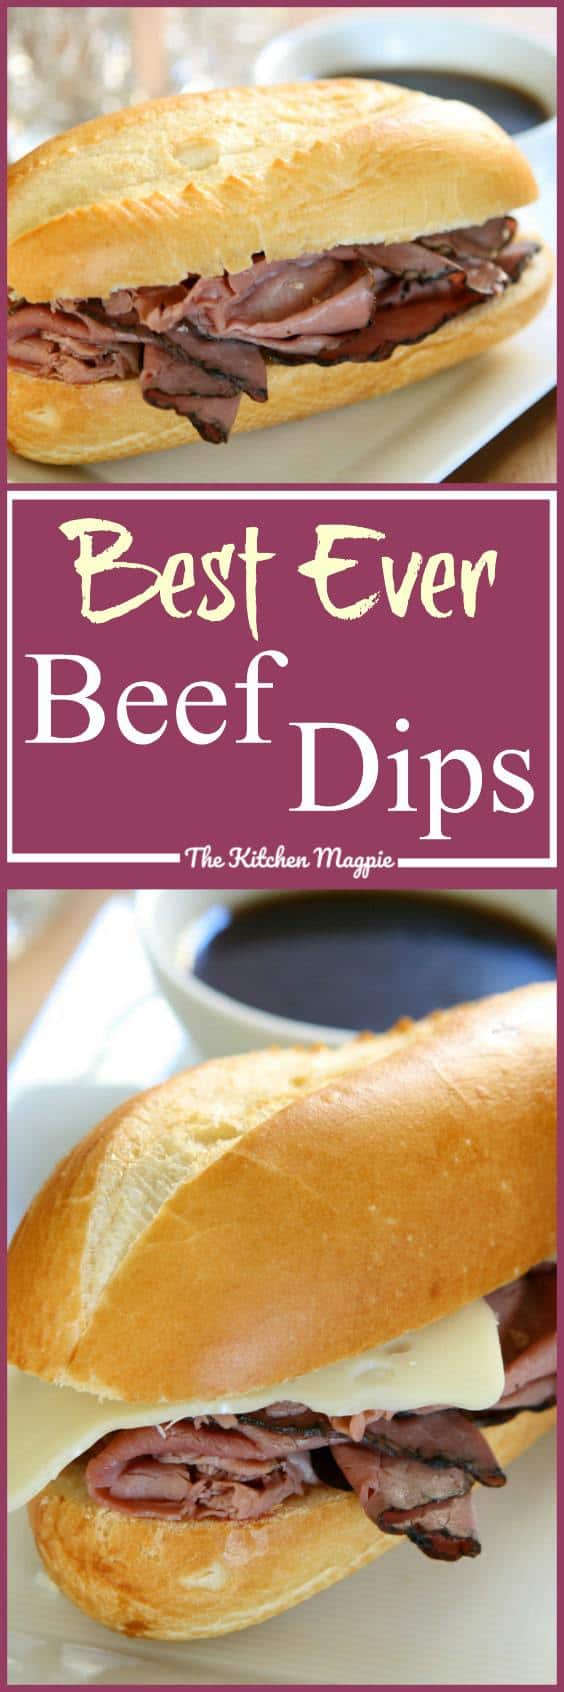 Easy and delicious Beef Dip recipe! From @kitchenmagpie